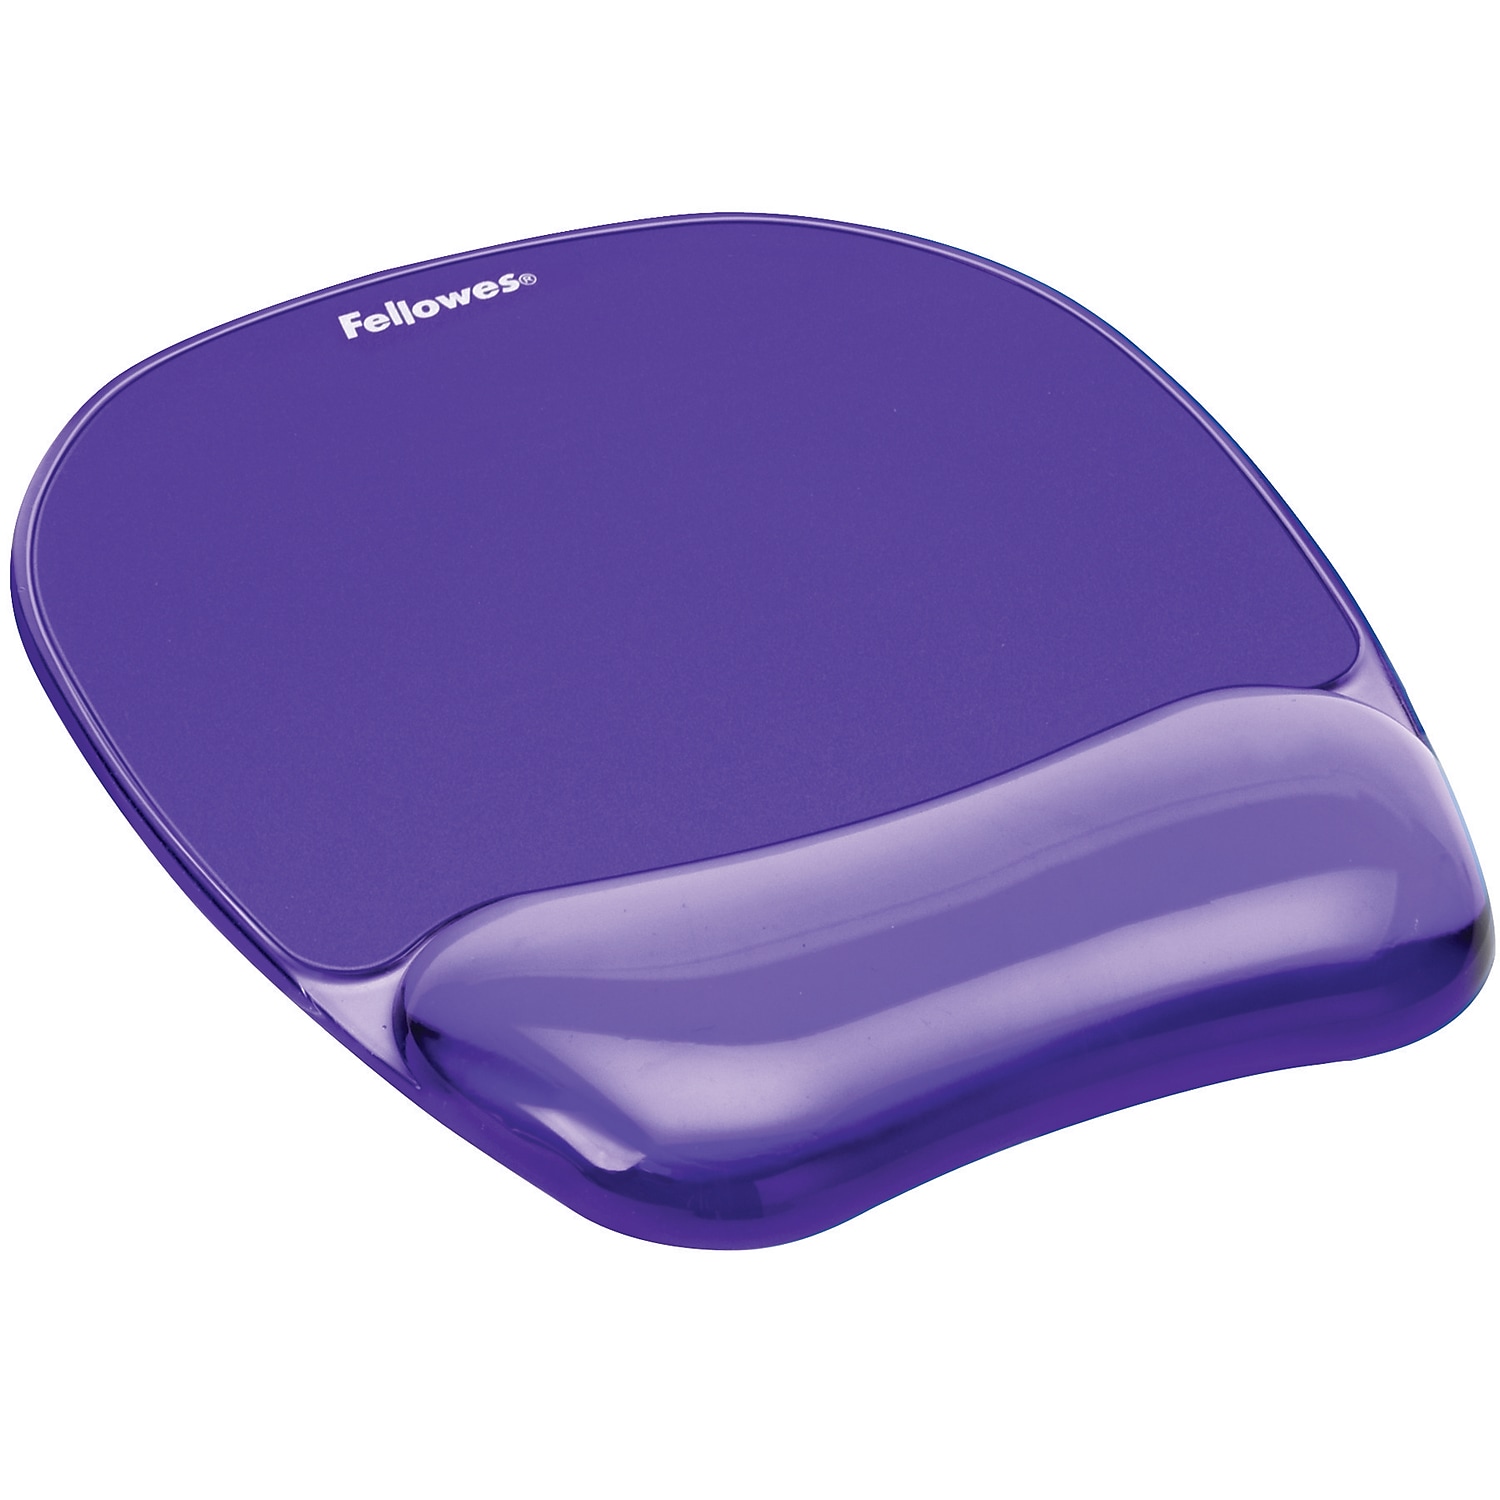 Fellowes 91441 Gel Crystals Mousepad/Wrist Rest - Purple - image 2 of 4